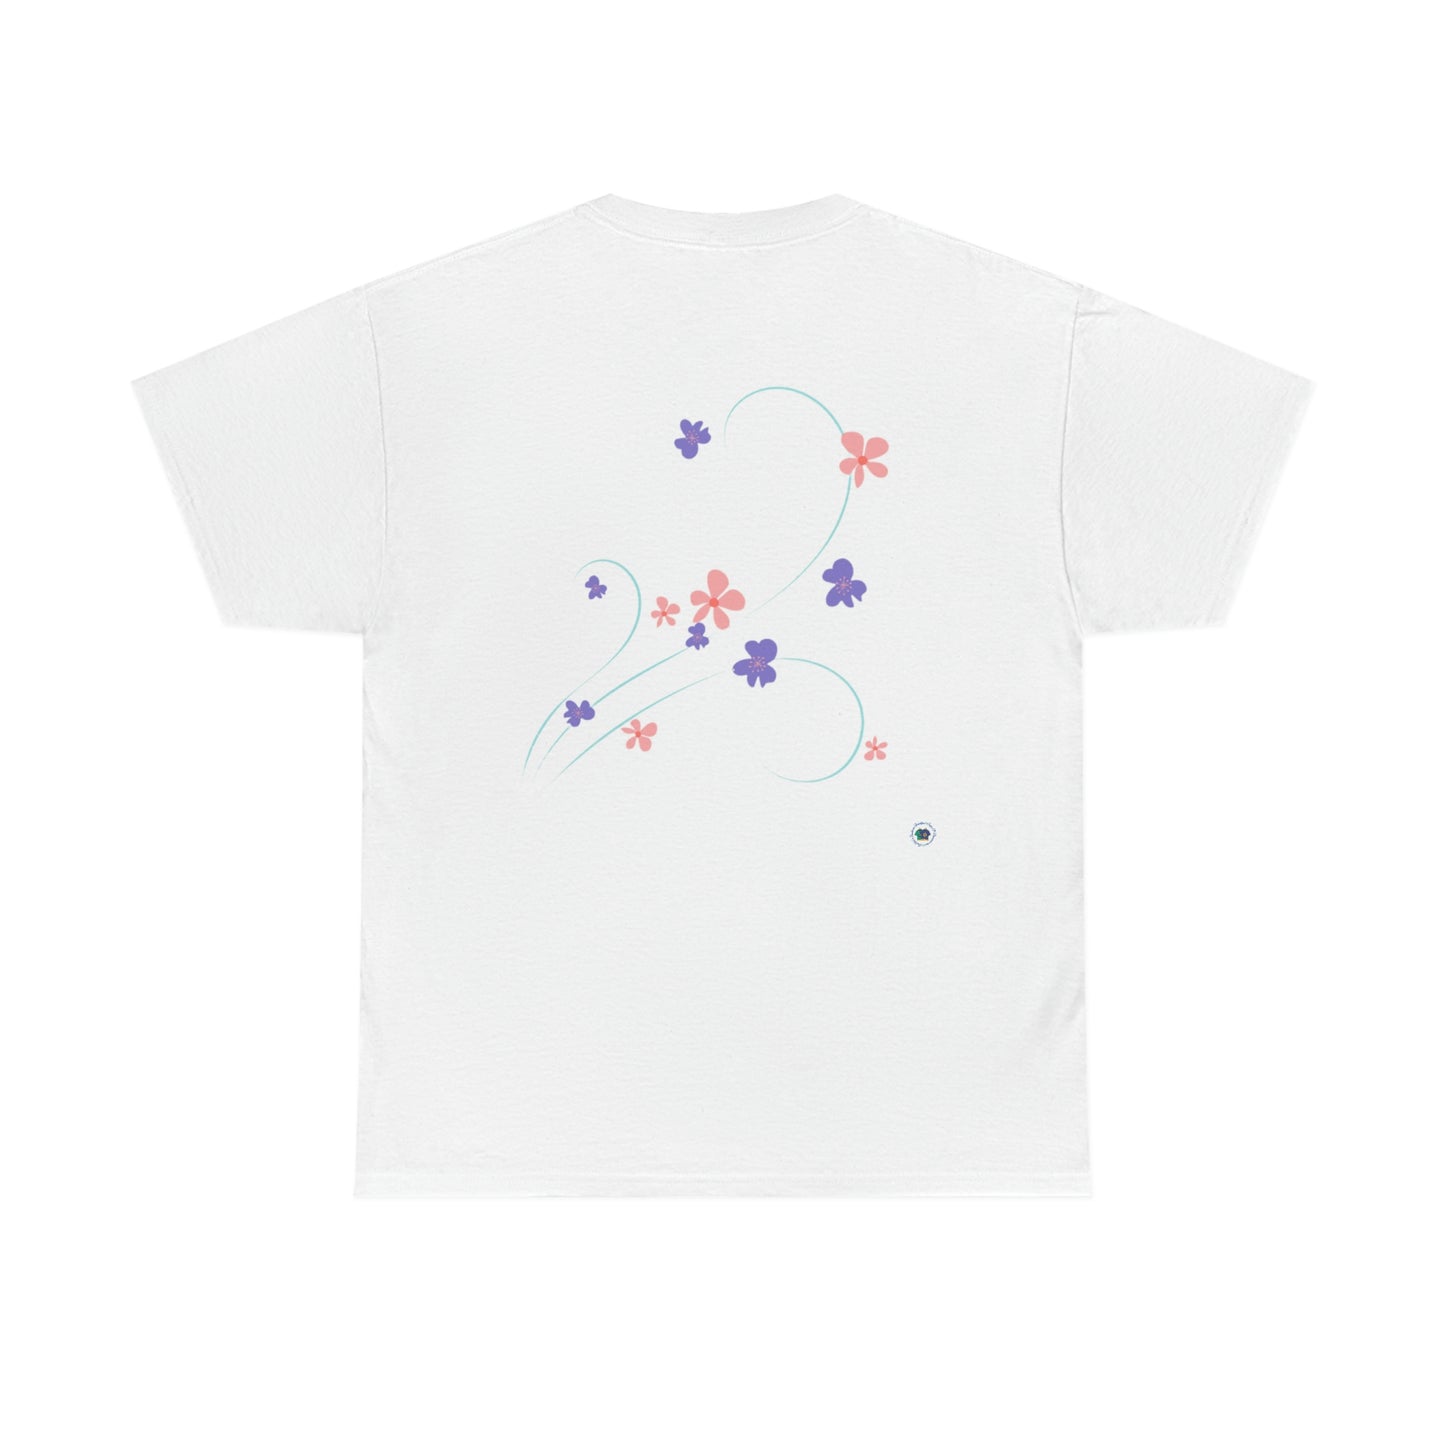 ‘Wind & Wishes’ Printed Front & Back Unisex Heavy Cotton Tee